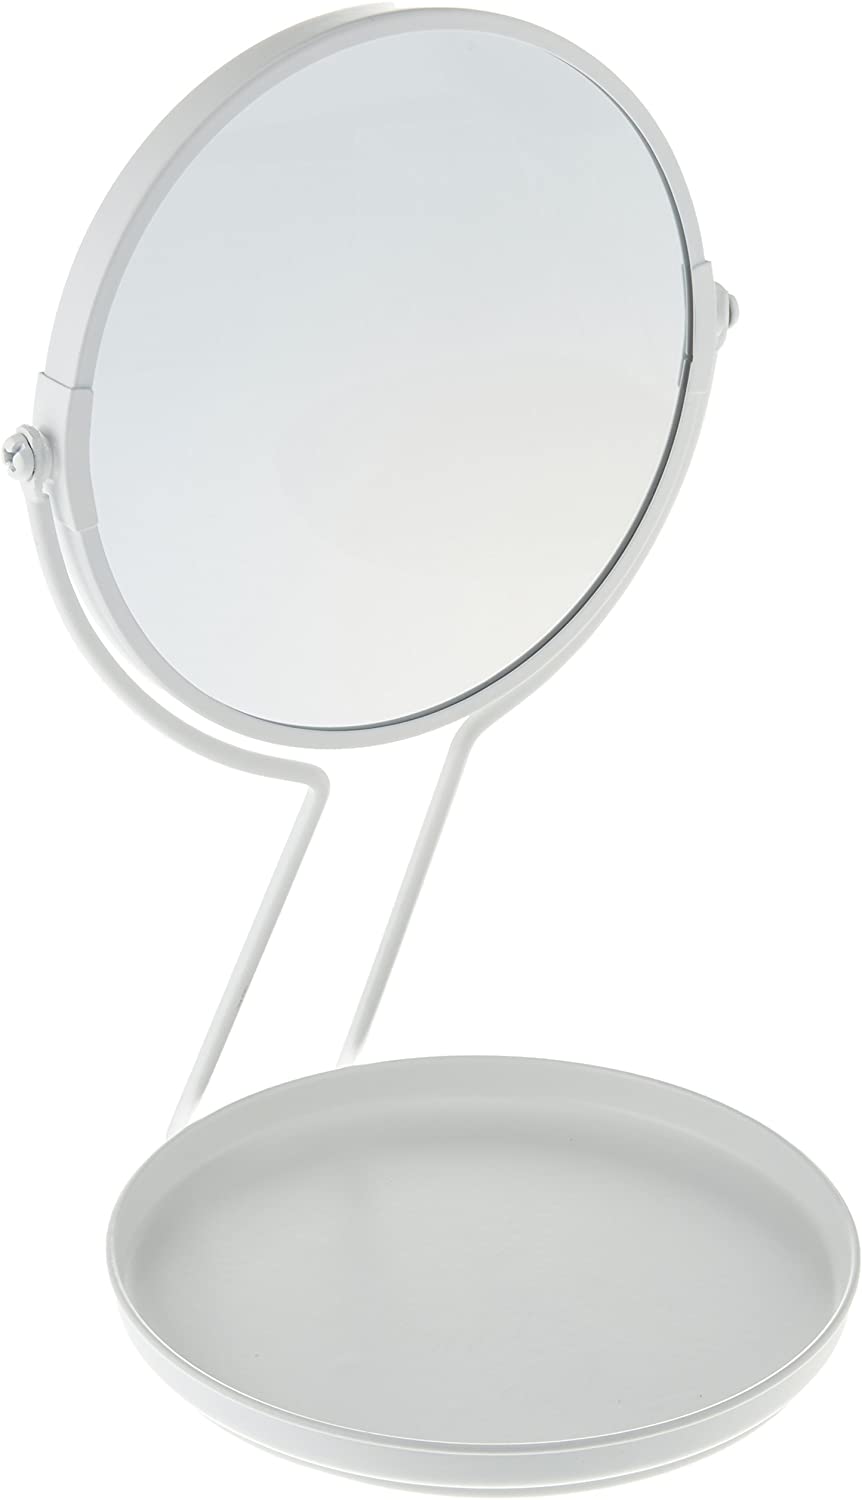 Umbra White Water Me Stand Magnifying Mirror, Bathroom 1005281 18 x 17.78 x 31.36 cm Metal Arch Mirror